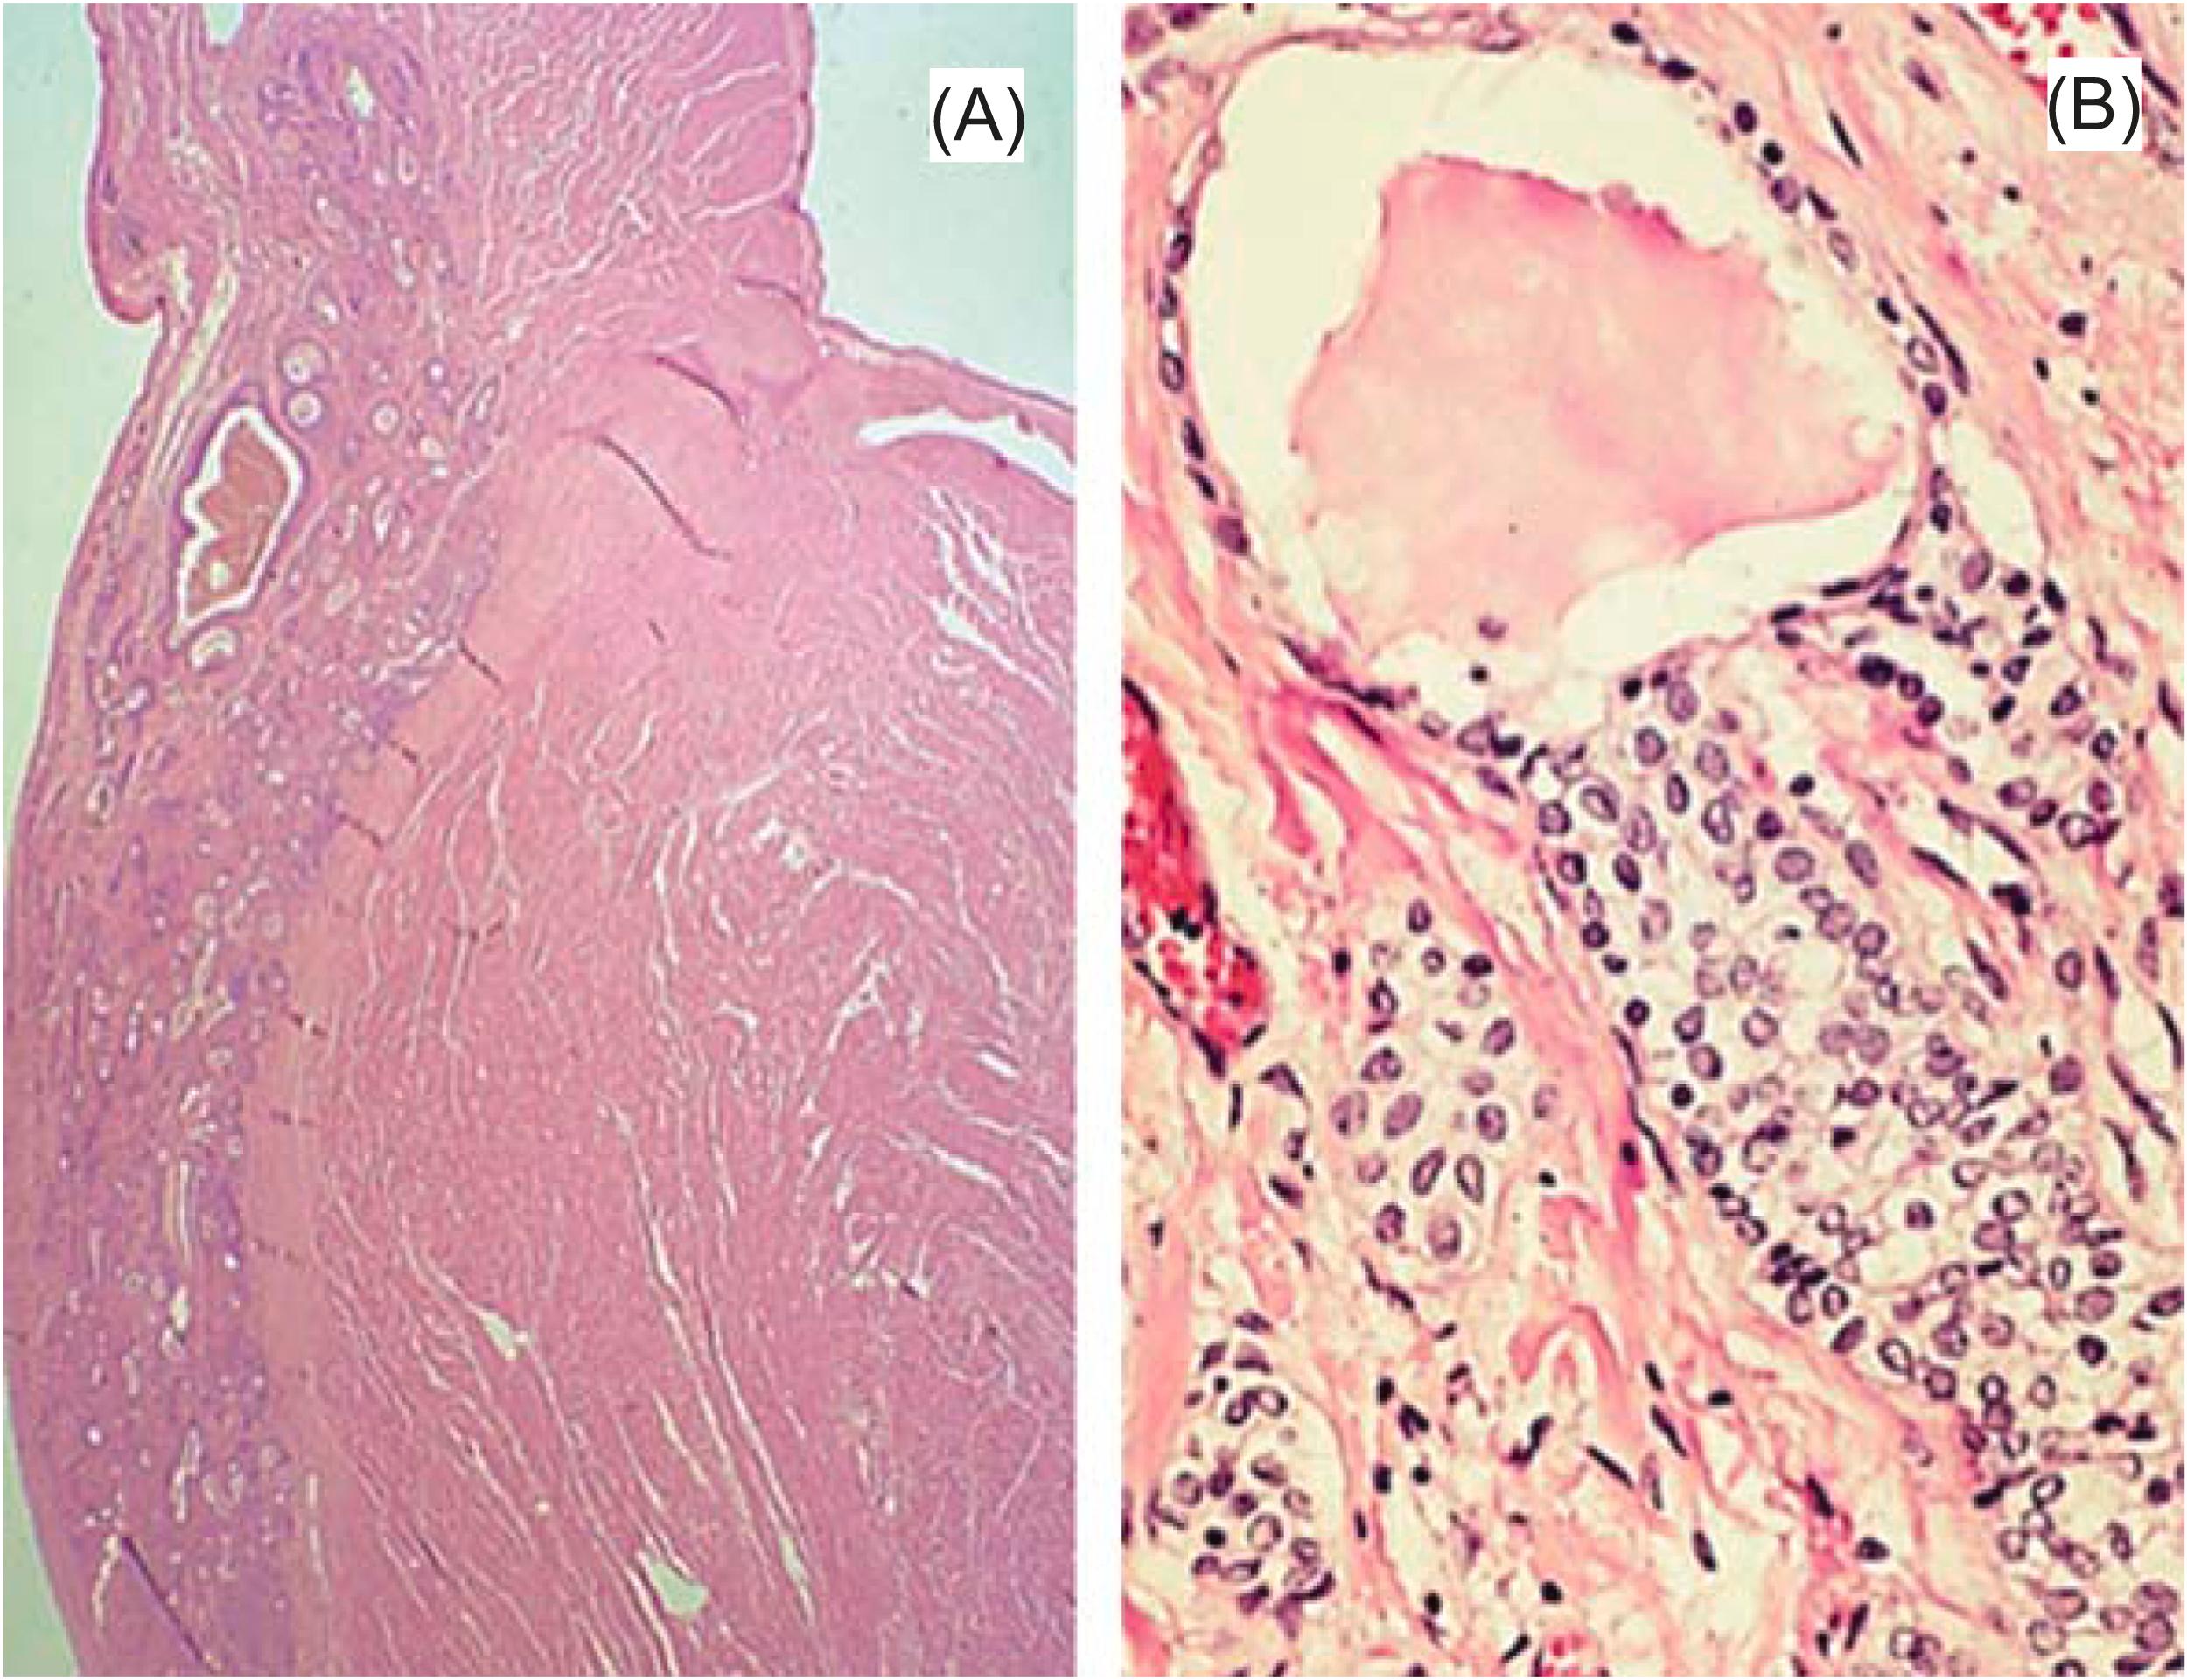 Figure 19.6, Atrioventricular nodal tumor, histology. (A) Histologic section demonstrates the cysts in the region of the atrioventricular node. They do not affect the central fibrous body. (B) The cysts are lined by epithelium composed of a mixture of transitional and cuboidal cells.